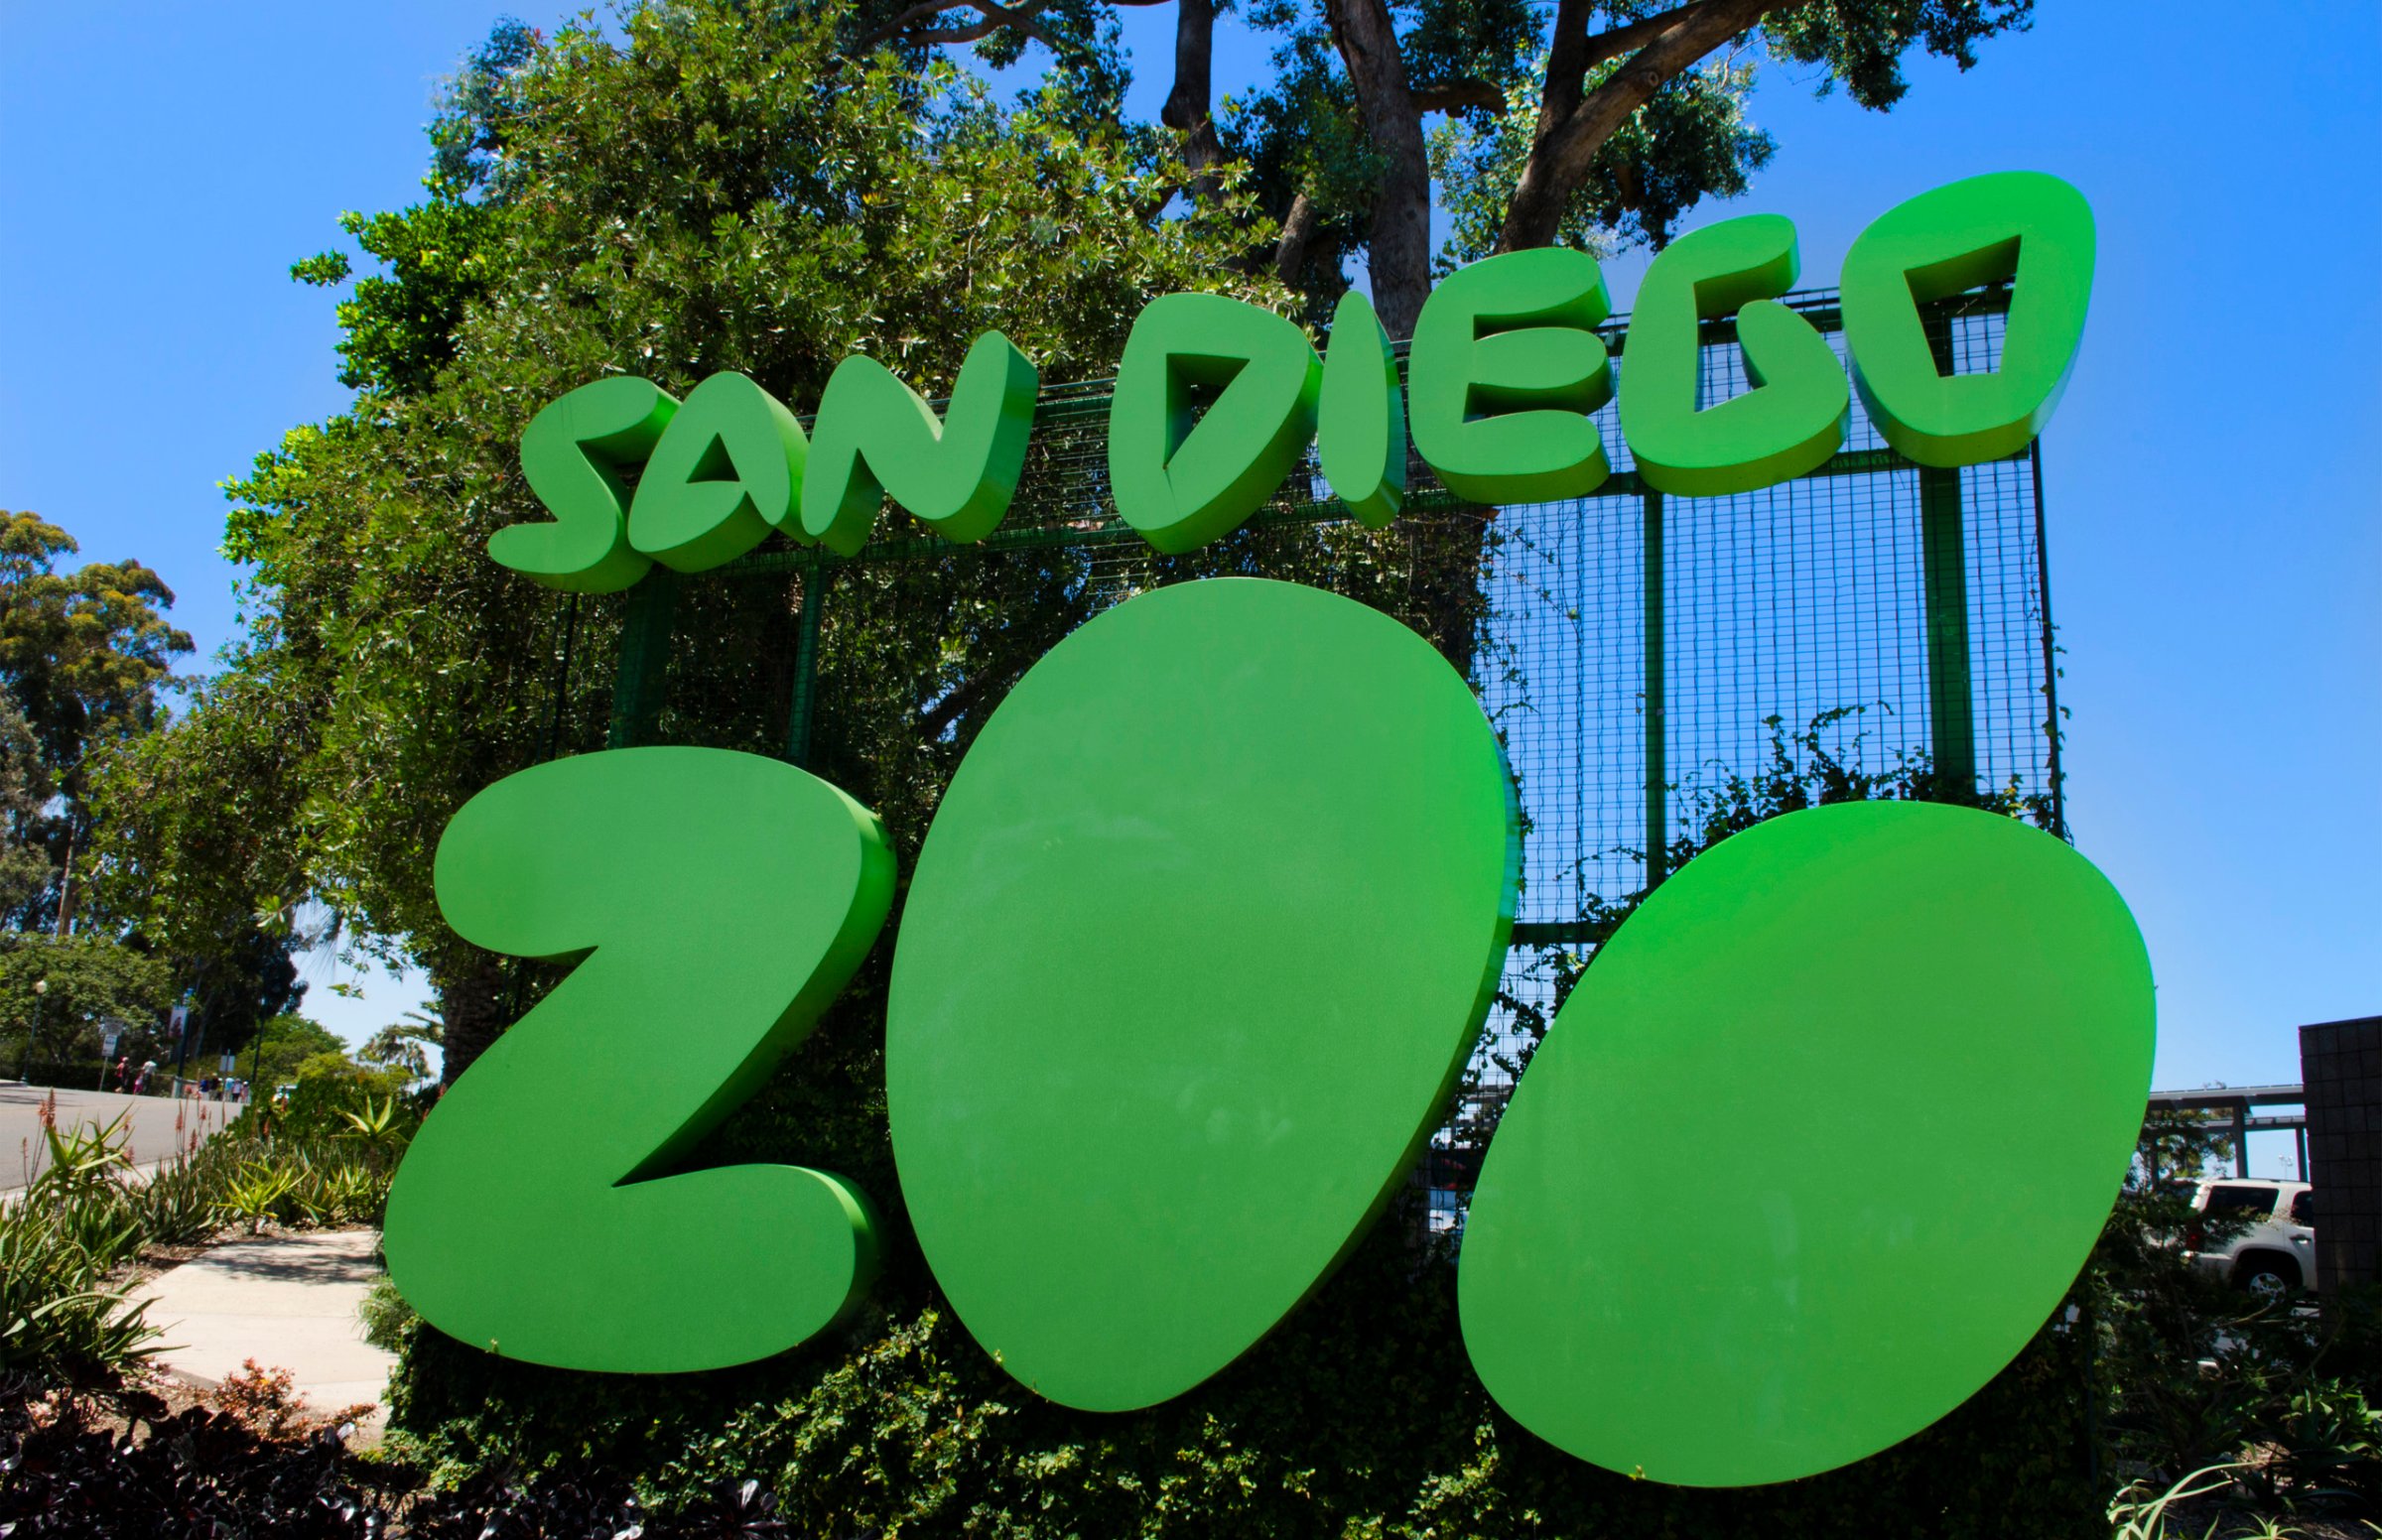 Famous San Diego Zoo sign in Balboa Park in San Diego.